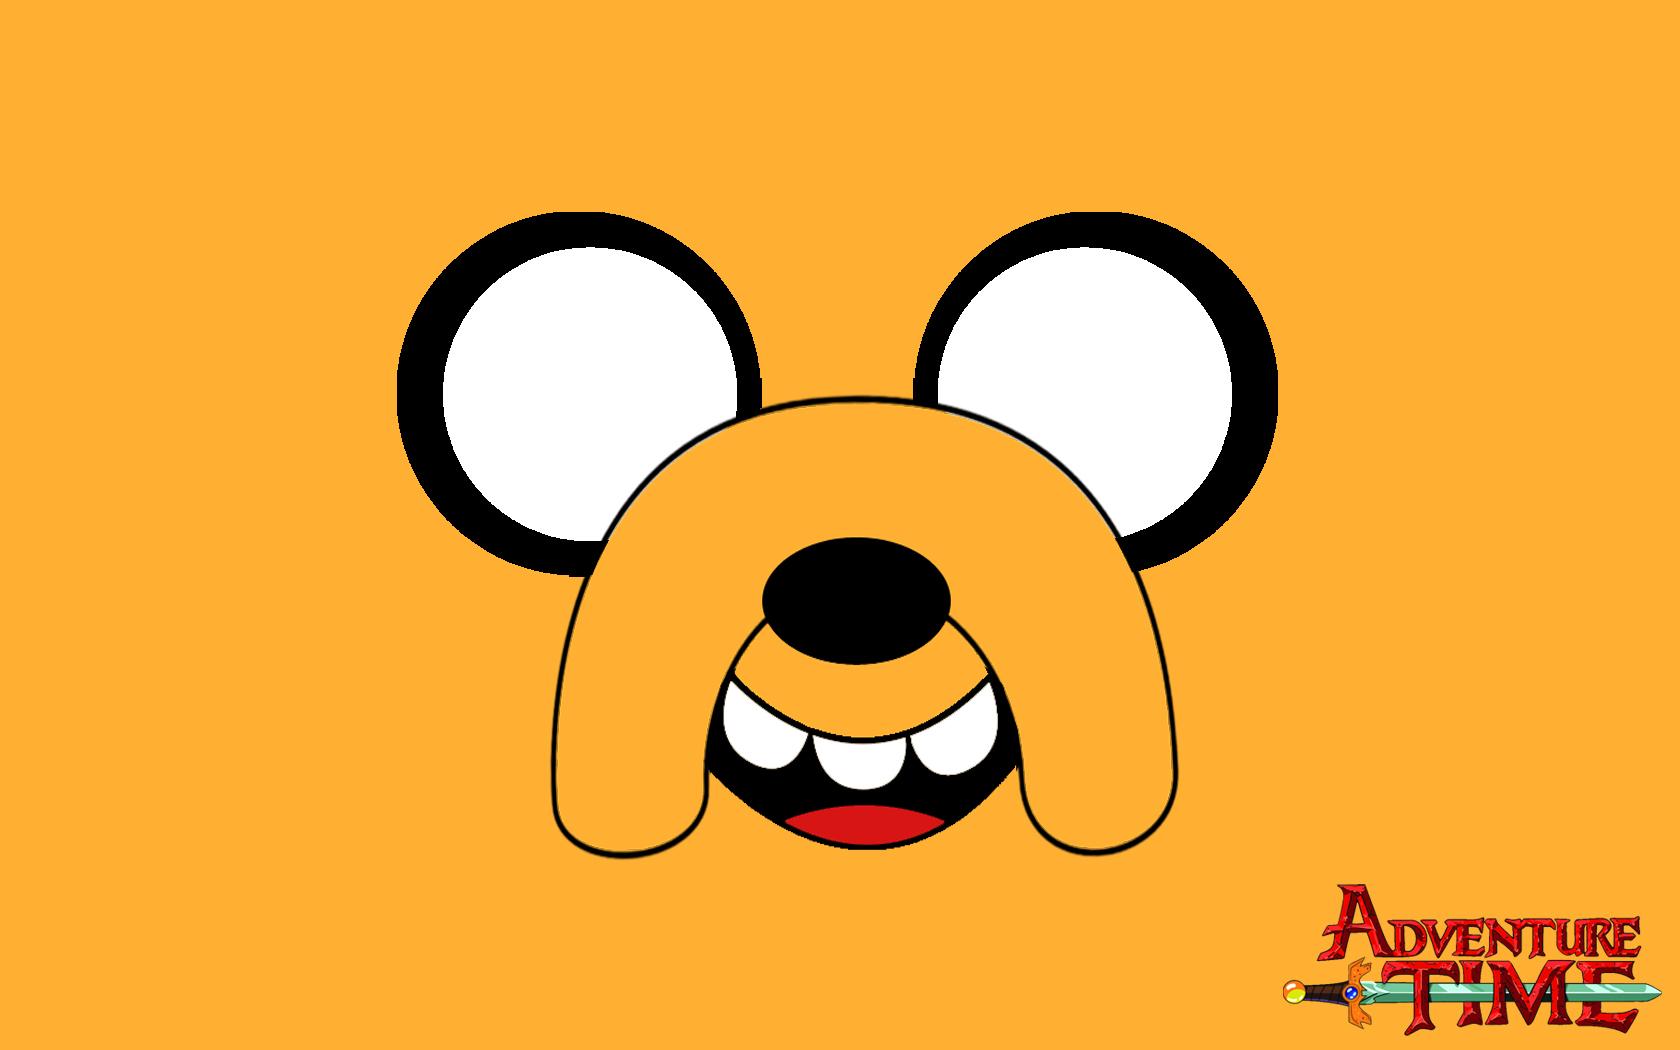 Download Jake the Dog Adventure time Wallpaper